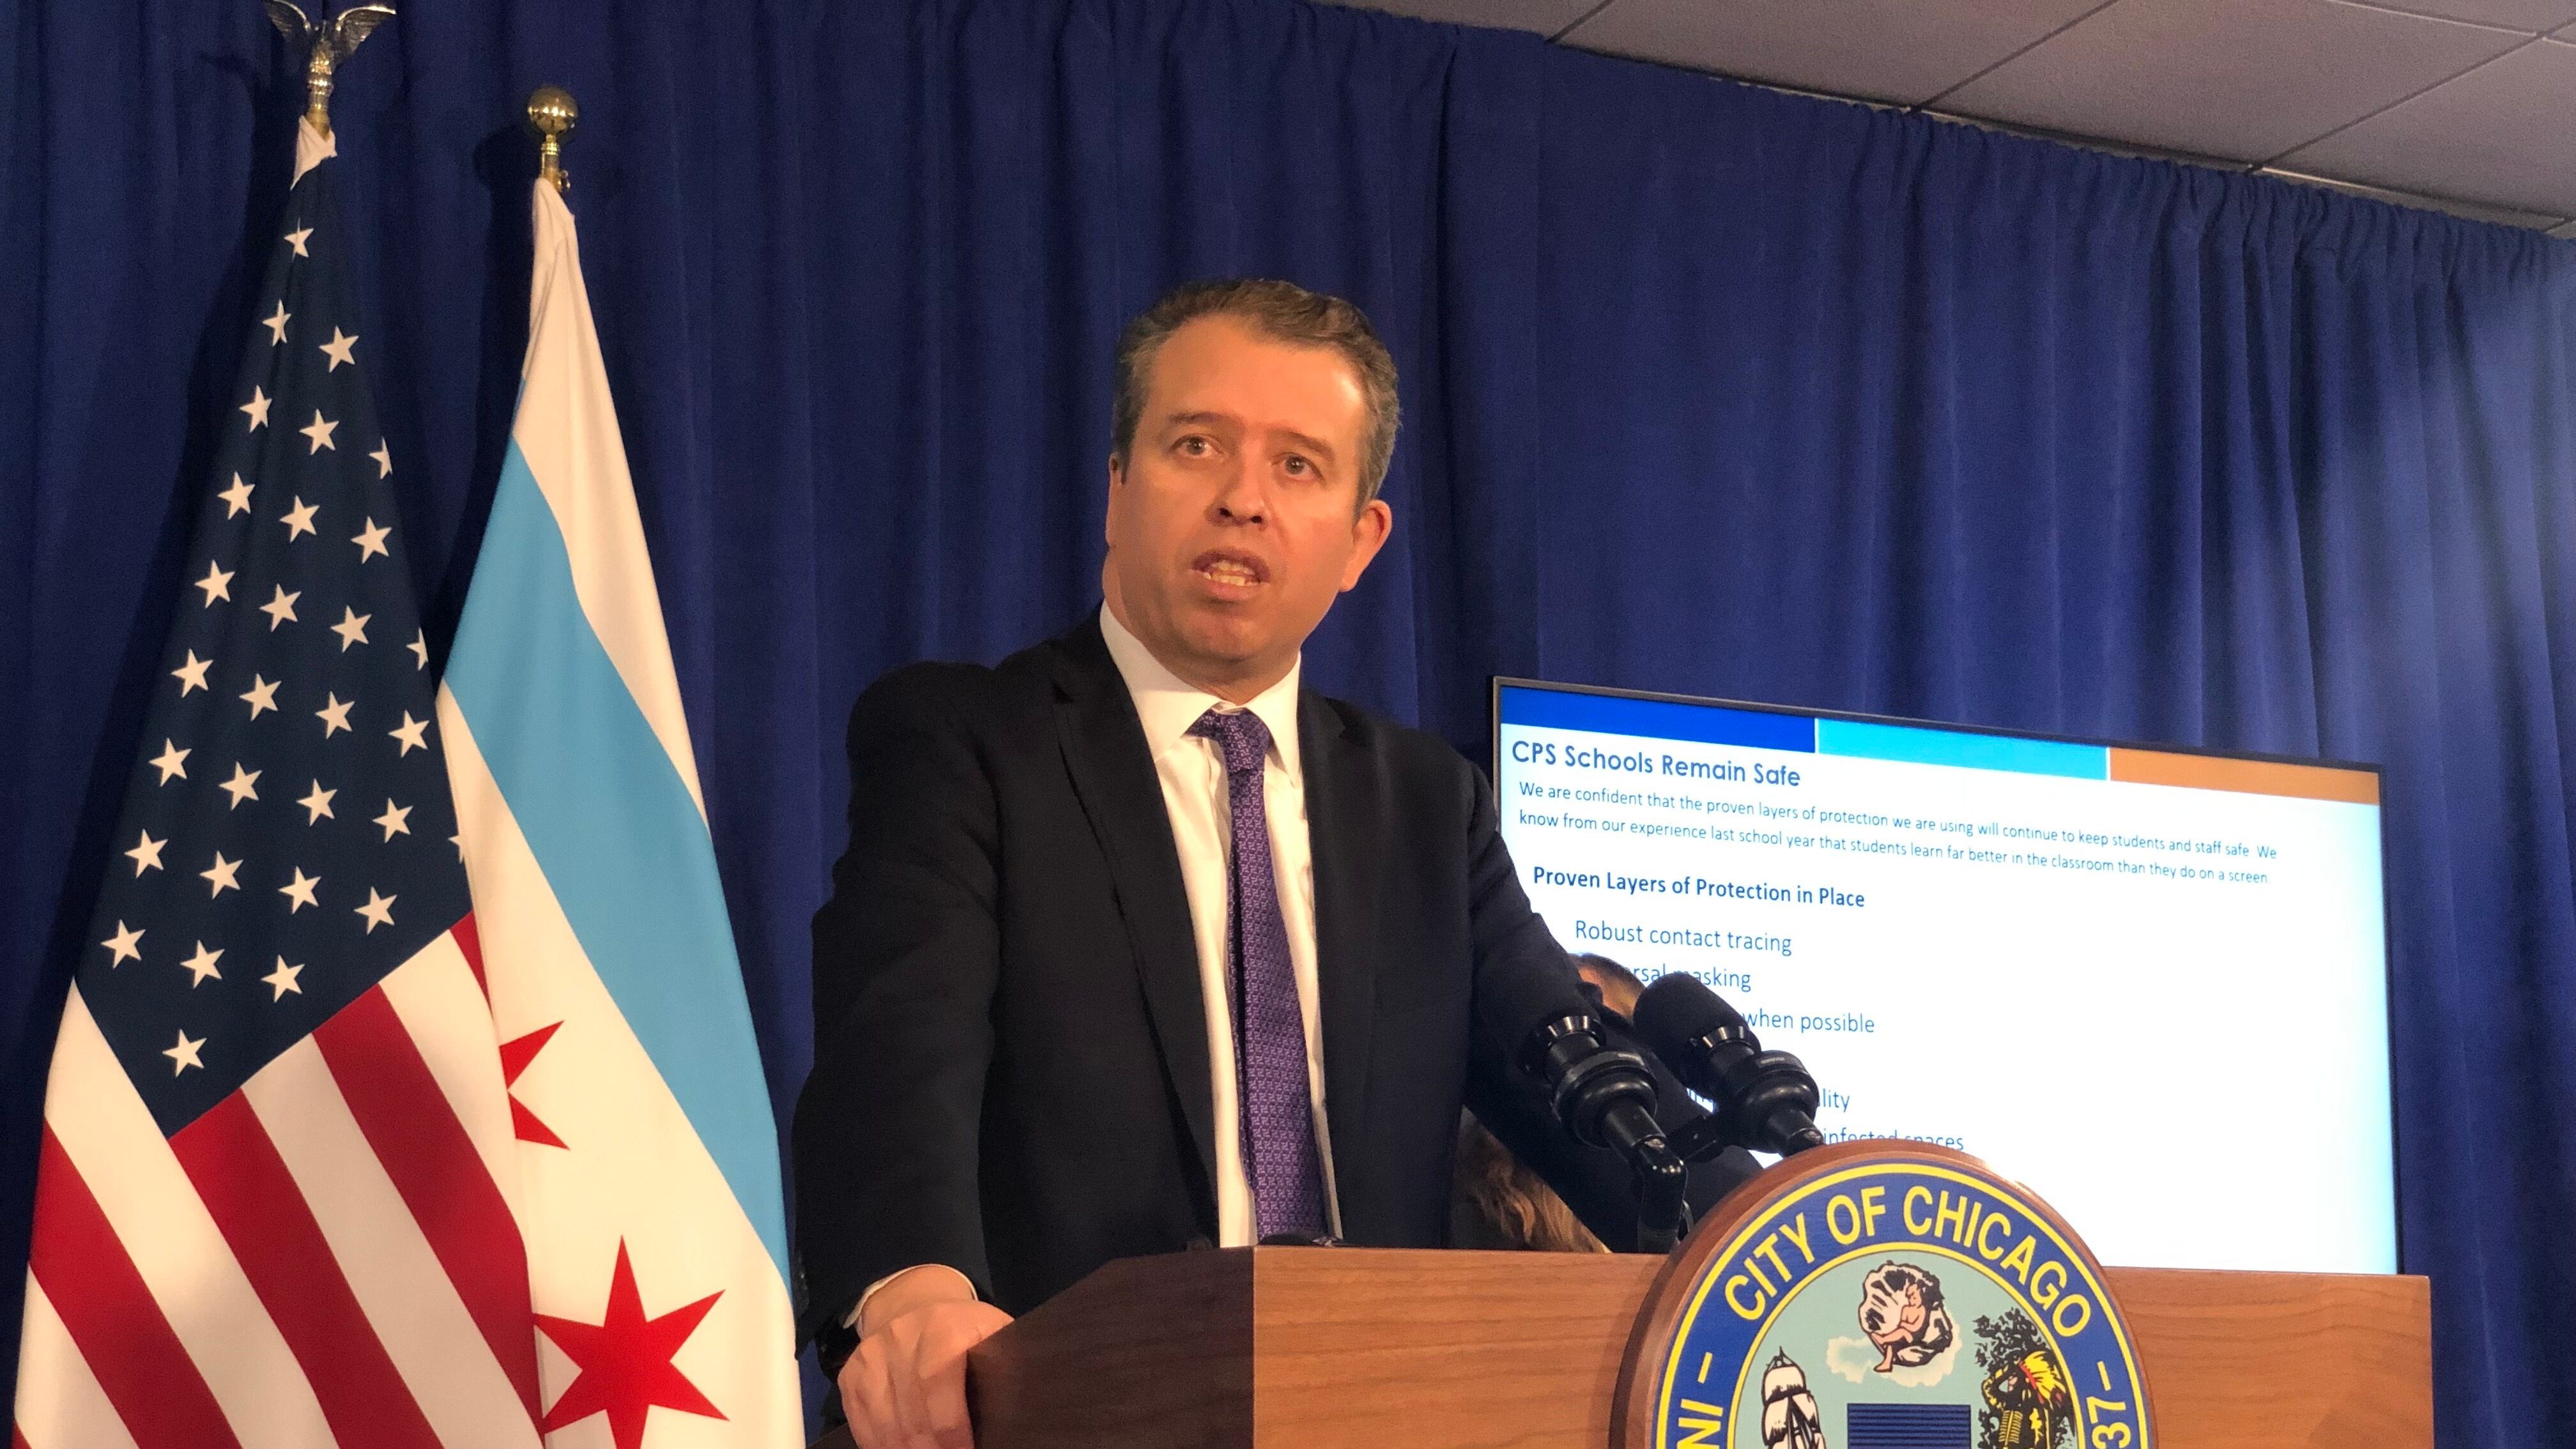 Chicago Public Schools CEO Pedro Martinez, wearing a black suit and purple tie, speaks at a City of Chicago podium during a press conference. Chicago and U.S. flags hang behind him against a blue backdrop, along with a screen providing COVID information.